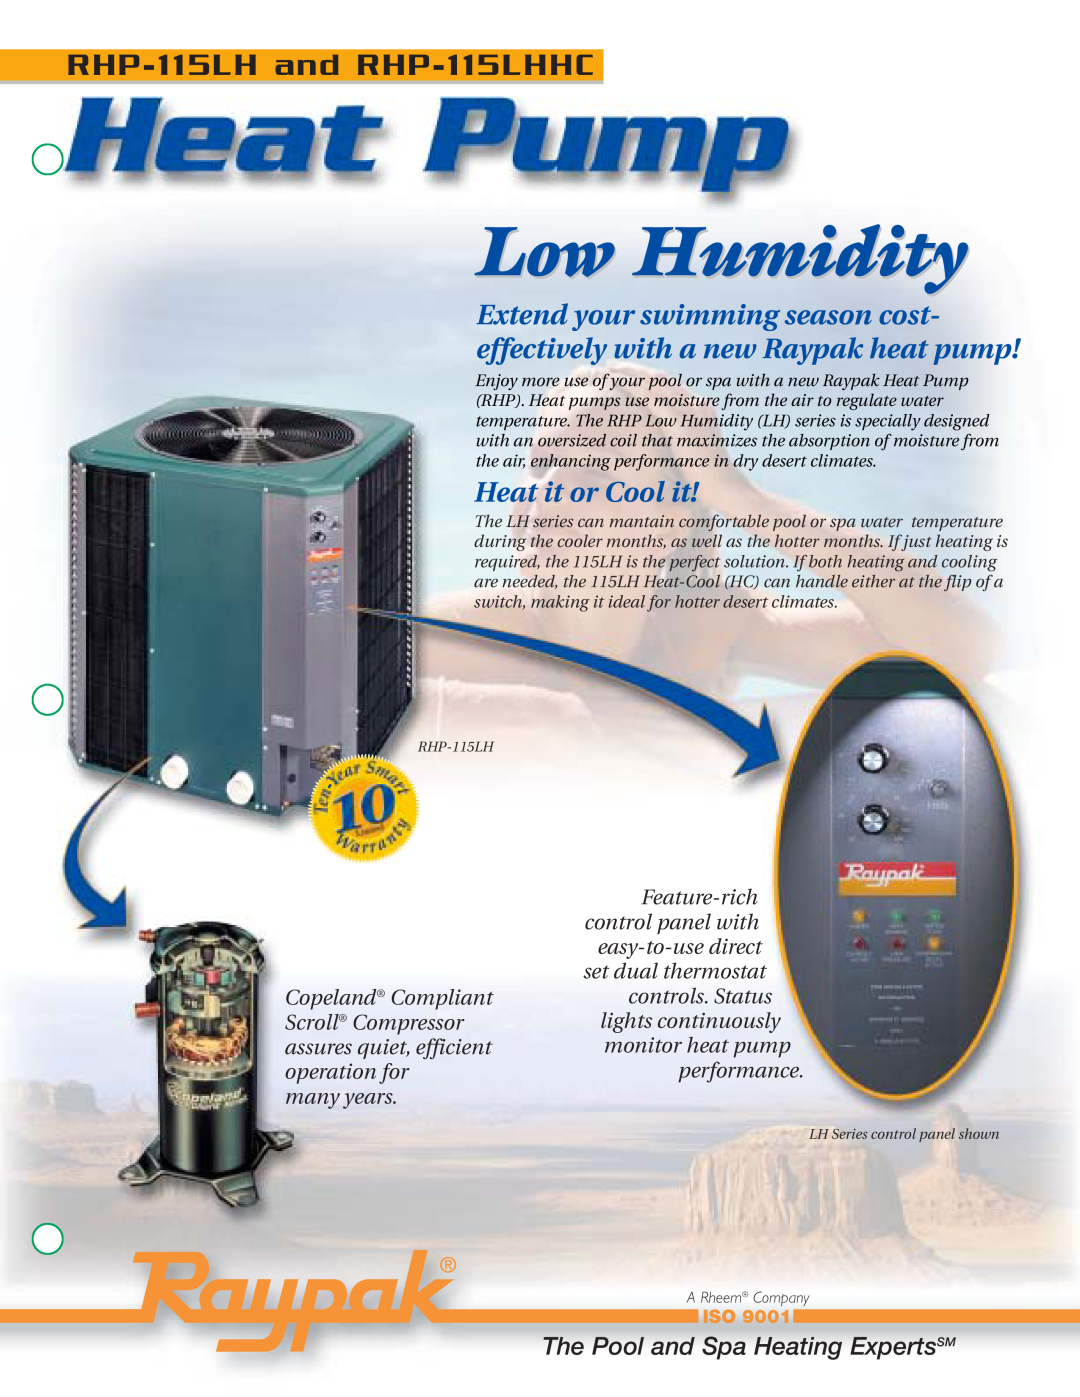 Raypak manual Low Humidity, RHP-115LHand RHP-115LHHC, Heat it or Cool it, The Pool and Spa Heating ExpertsSM 